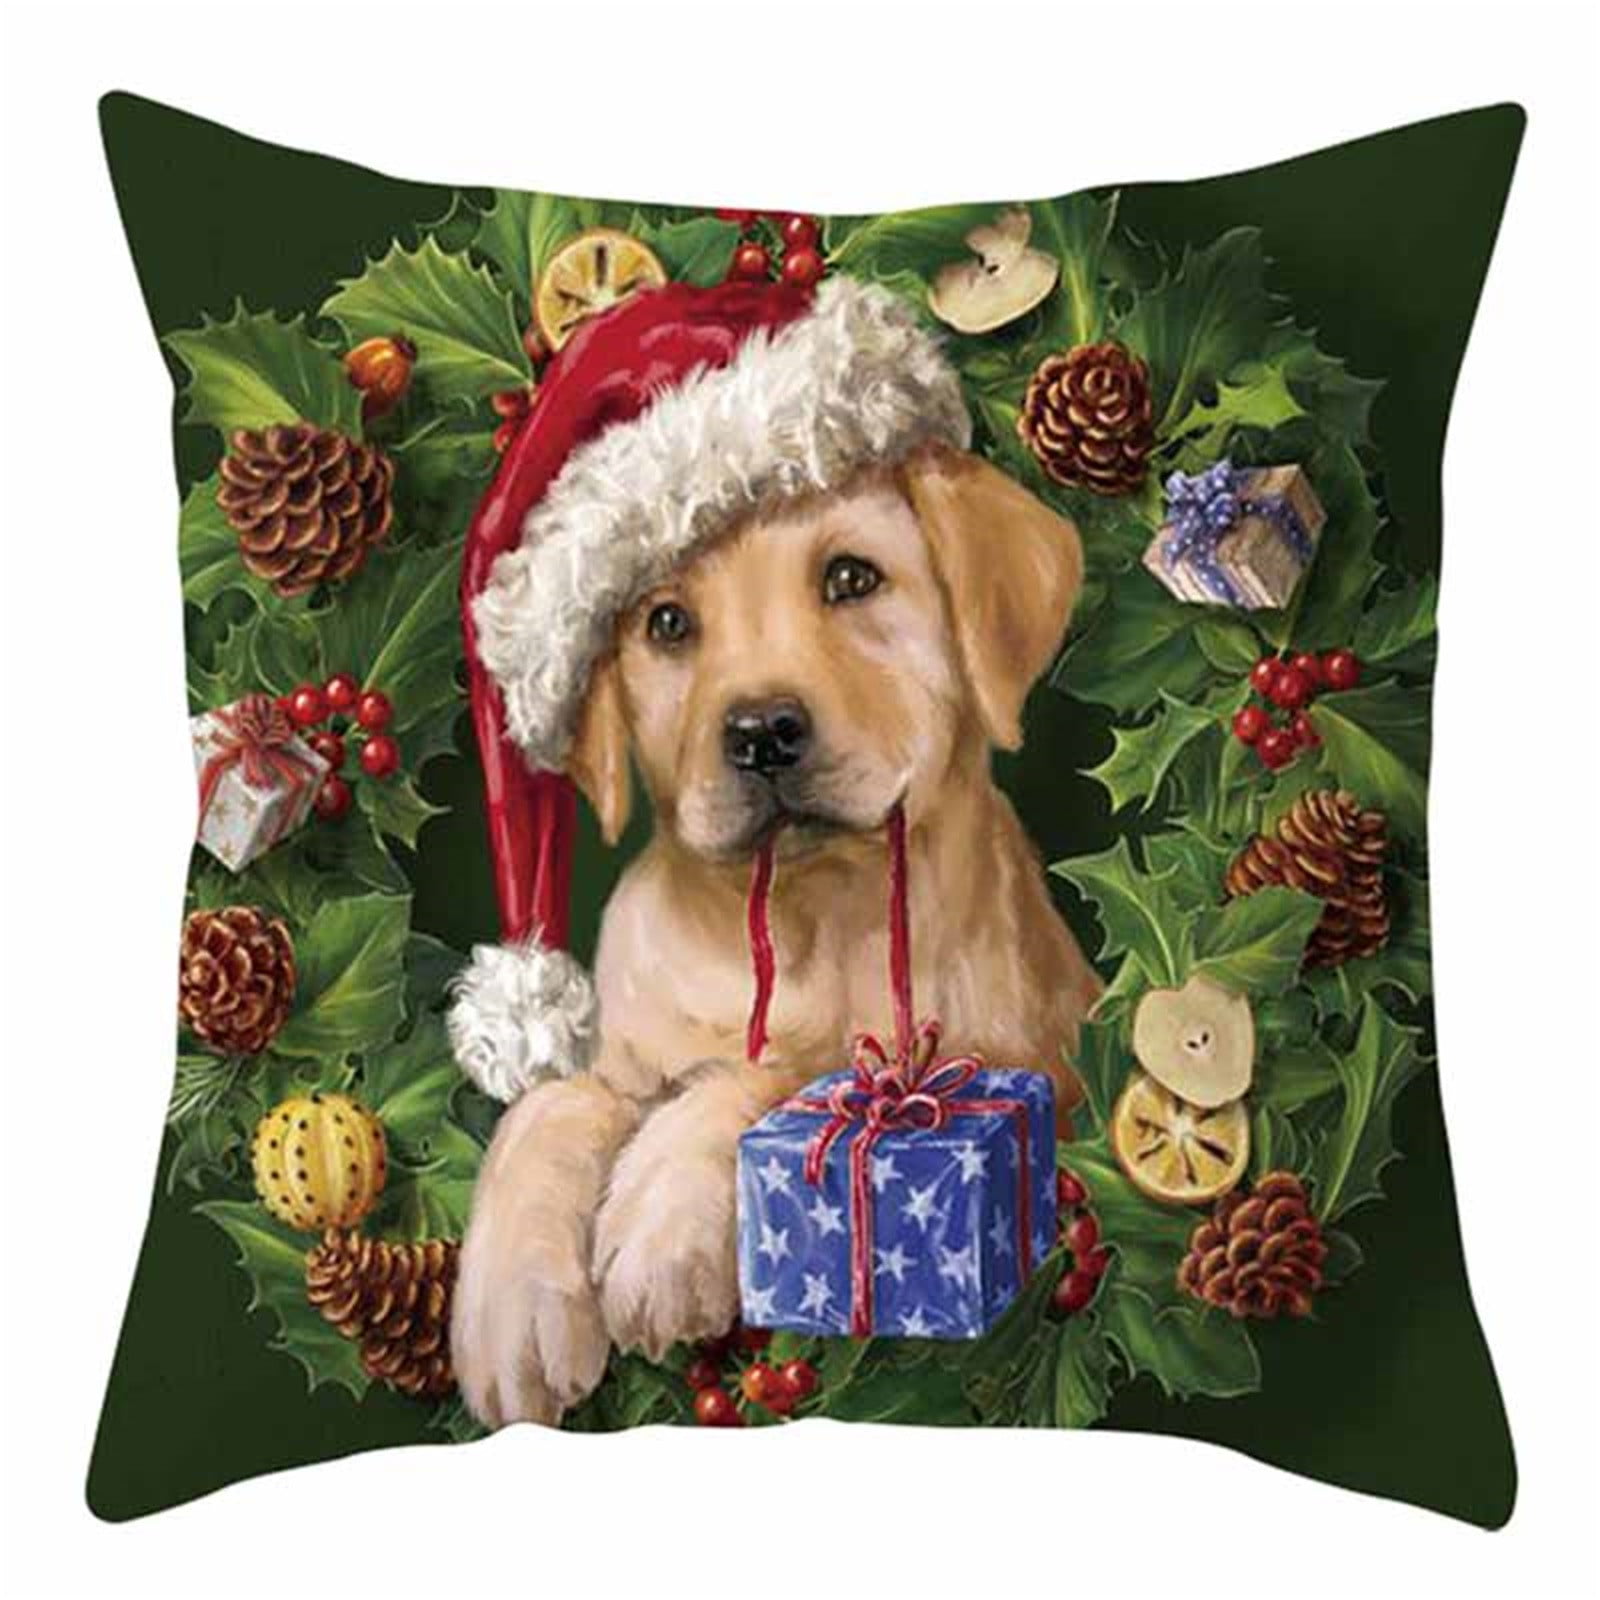 Happy Christmas Dog Pillow Cases Cotton Linen Sofa Cushion Covers Pillow Cover 